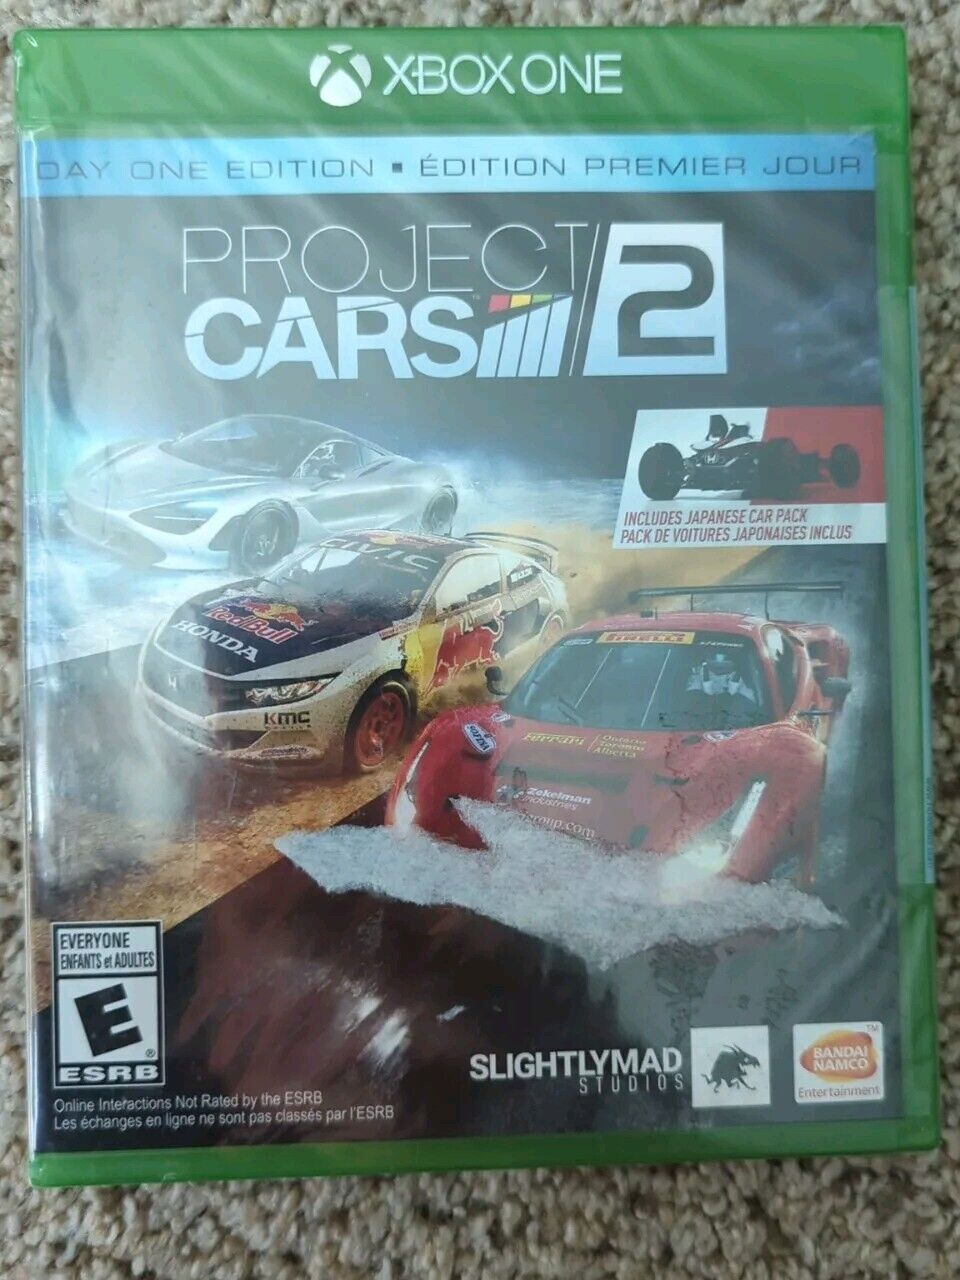 Project Cars 2: Day One Edition (Microsoft Xbox One, 2017) - Brand New!